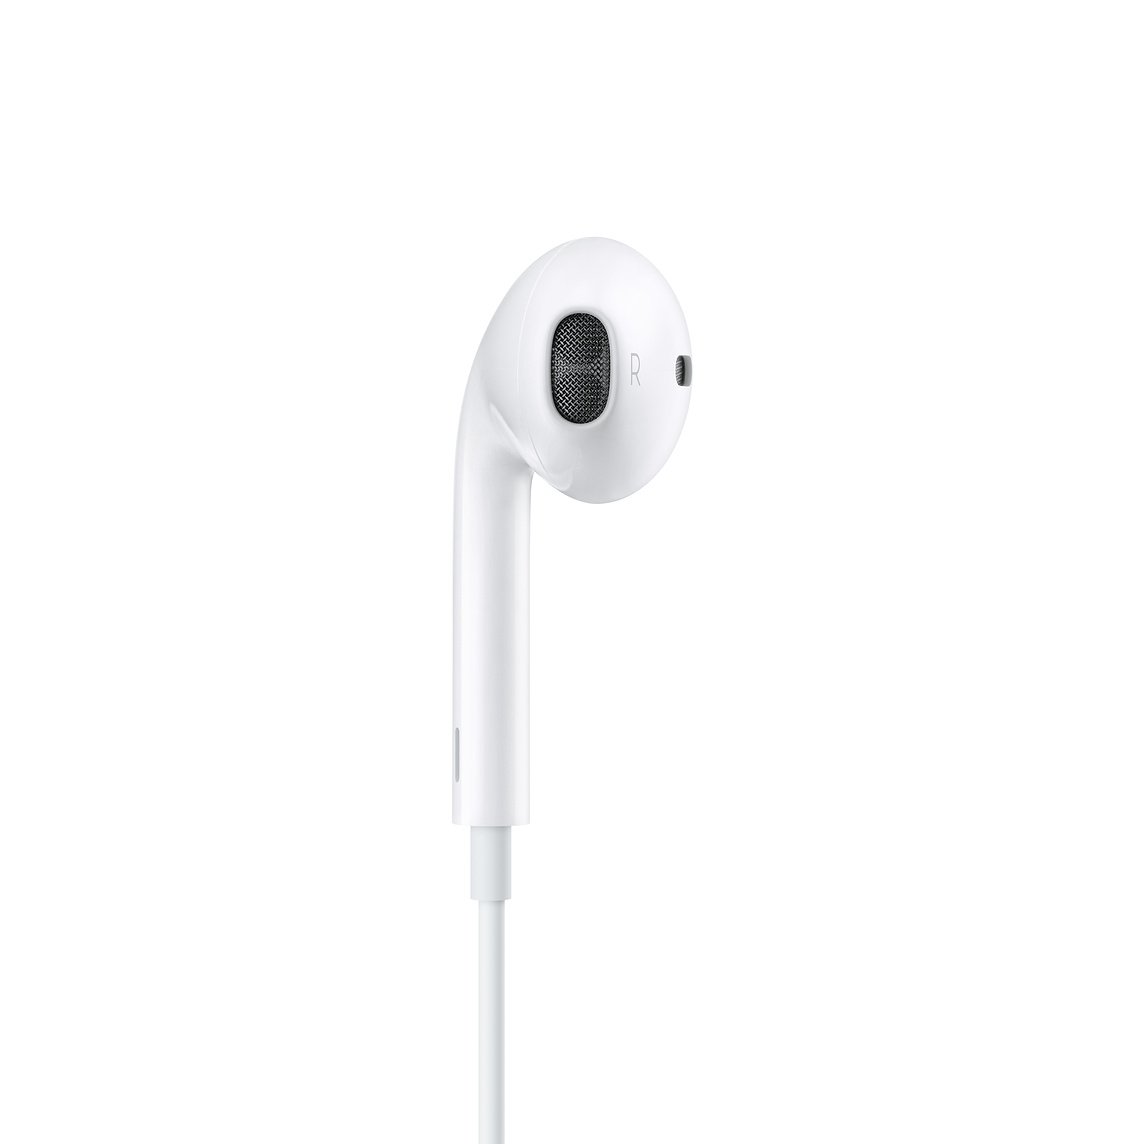 EarPods with Lightning Connector - Anker Kuwait